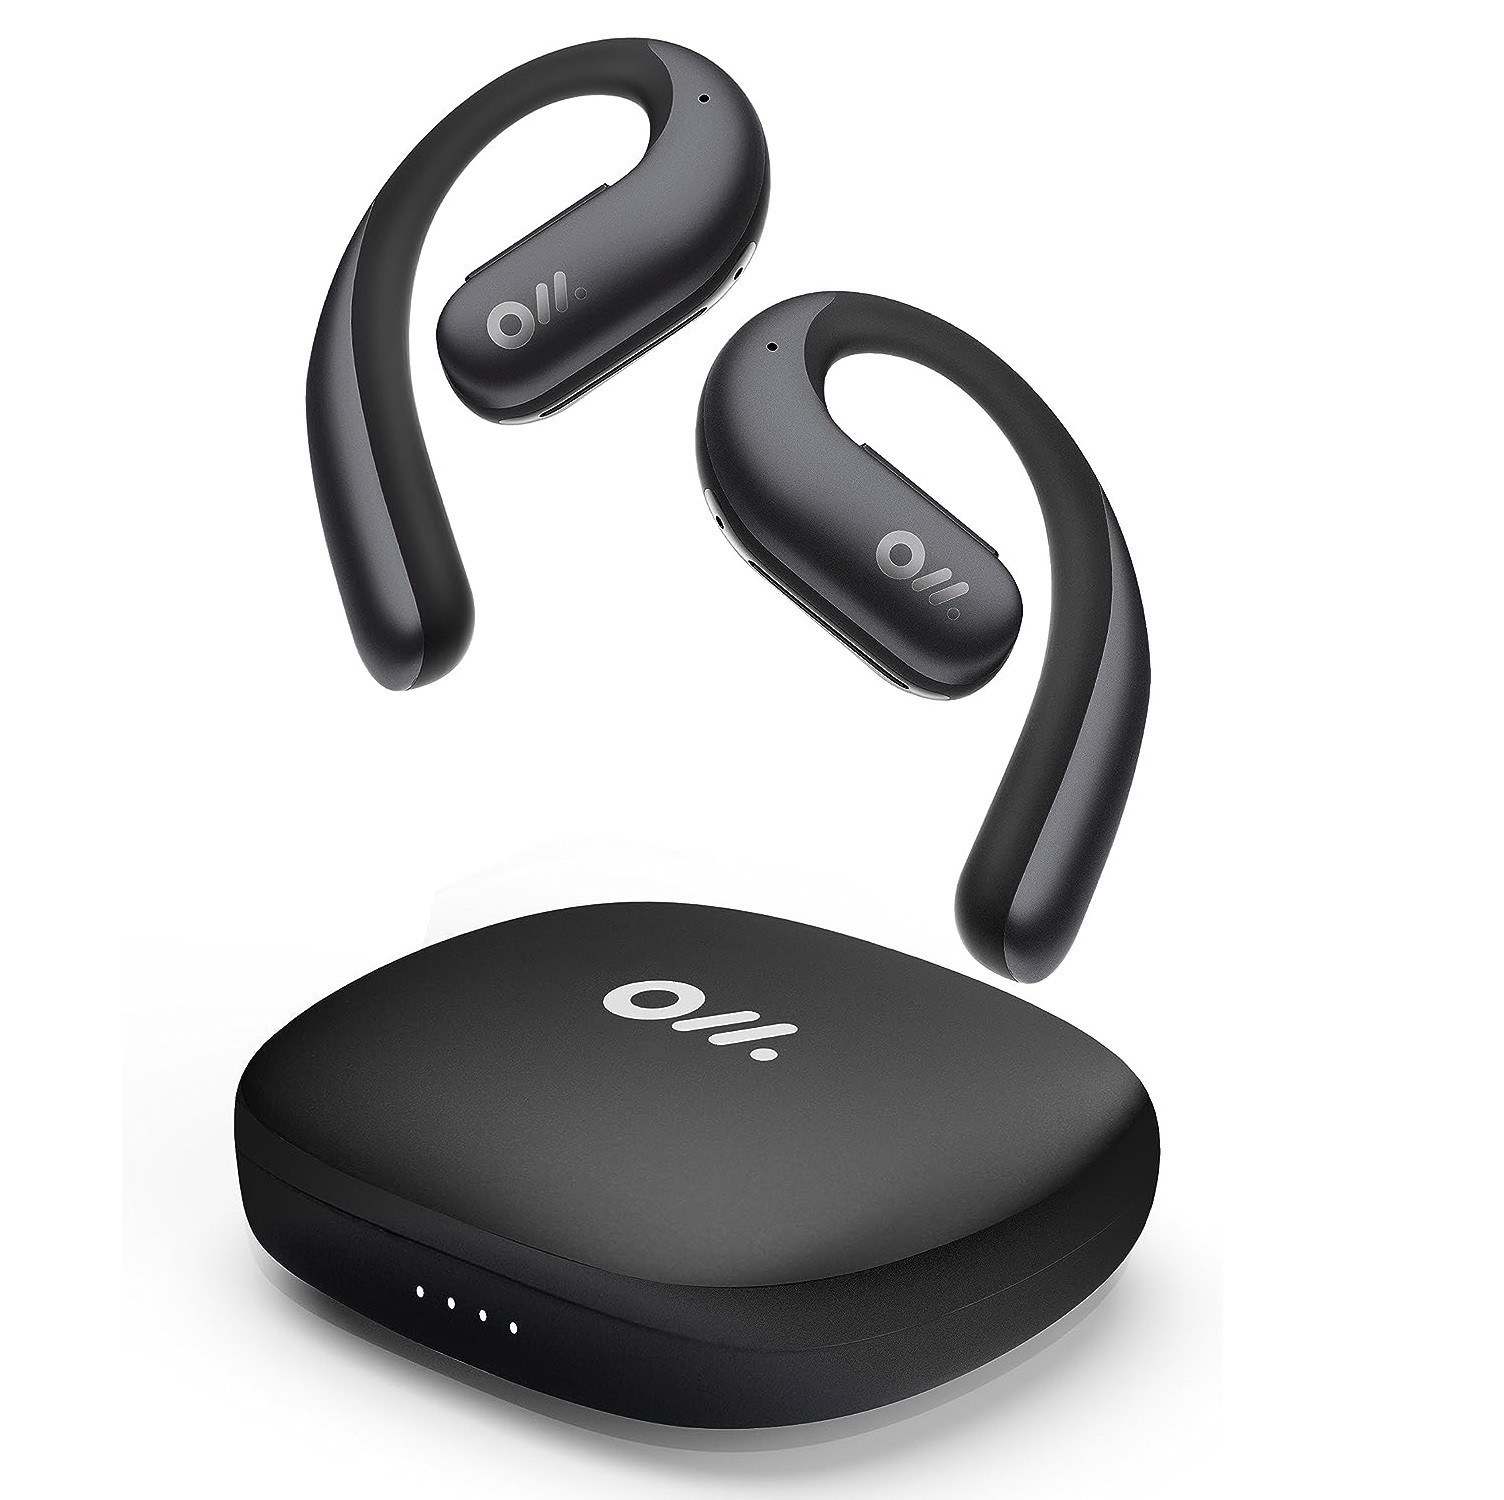 TAI NGHE OPEN-EAR OLADANCE OWS PRO MISTY BLACK (BLUETOOTH 5.3, PIN 16 GIỜ, SPATIAL AUDIO, ANC)